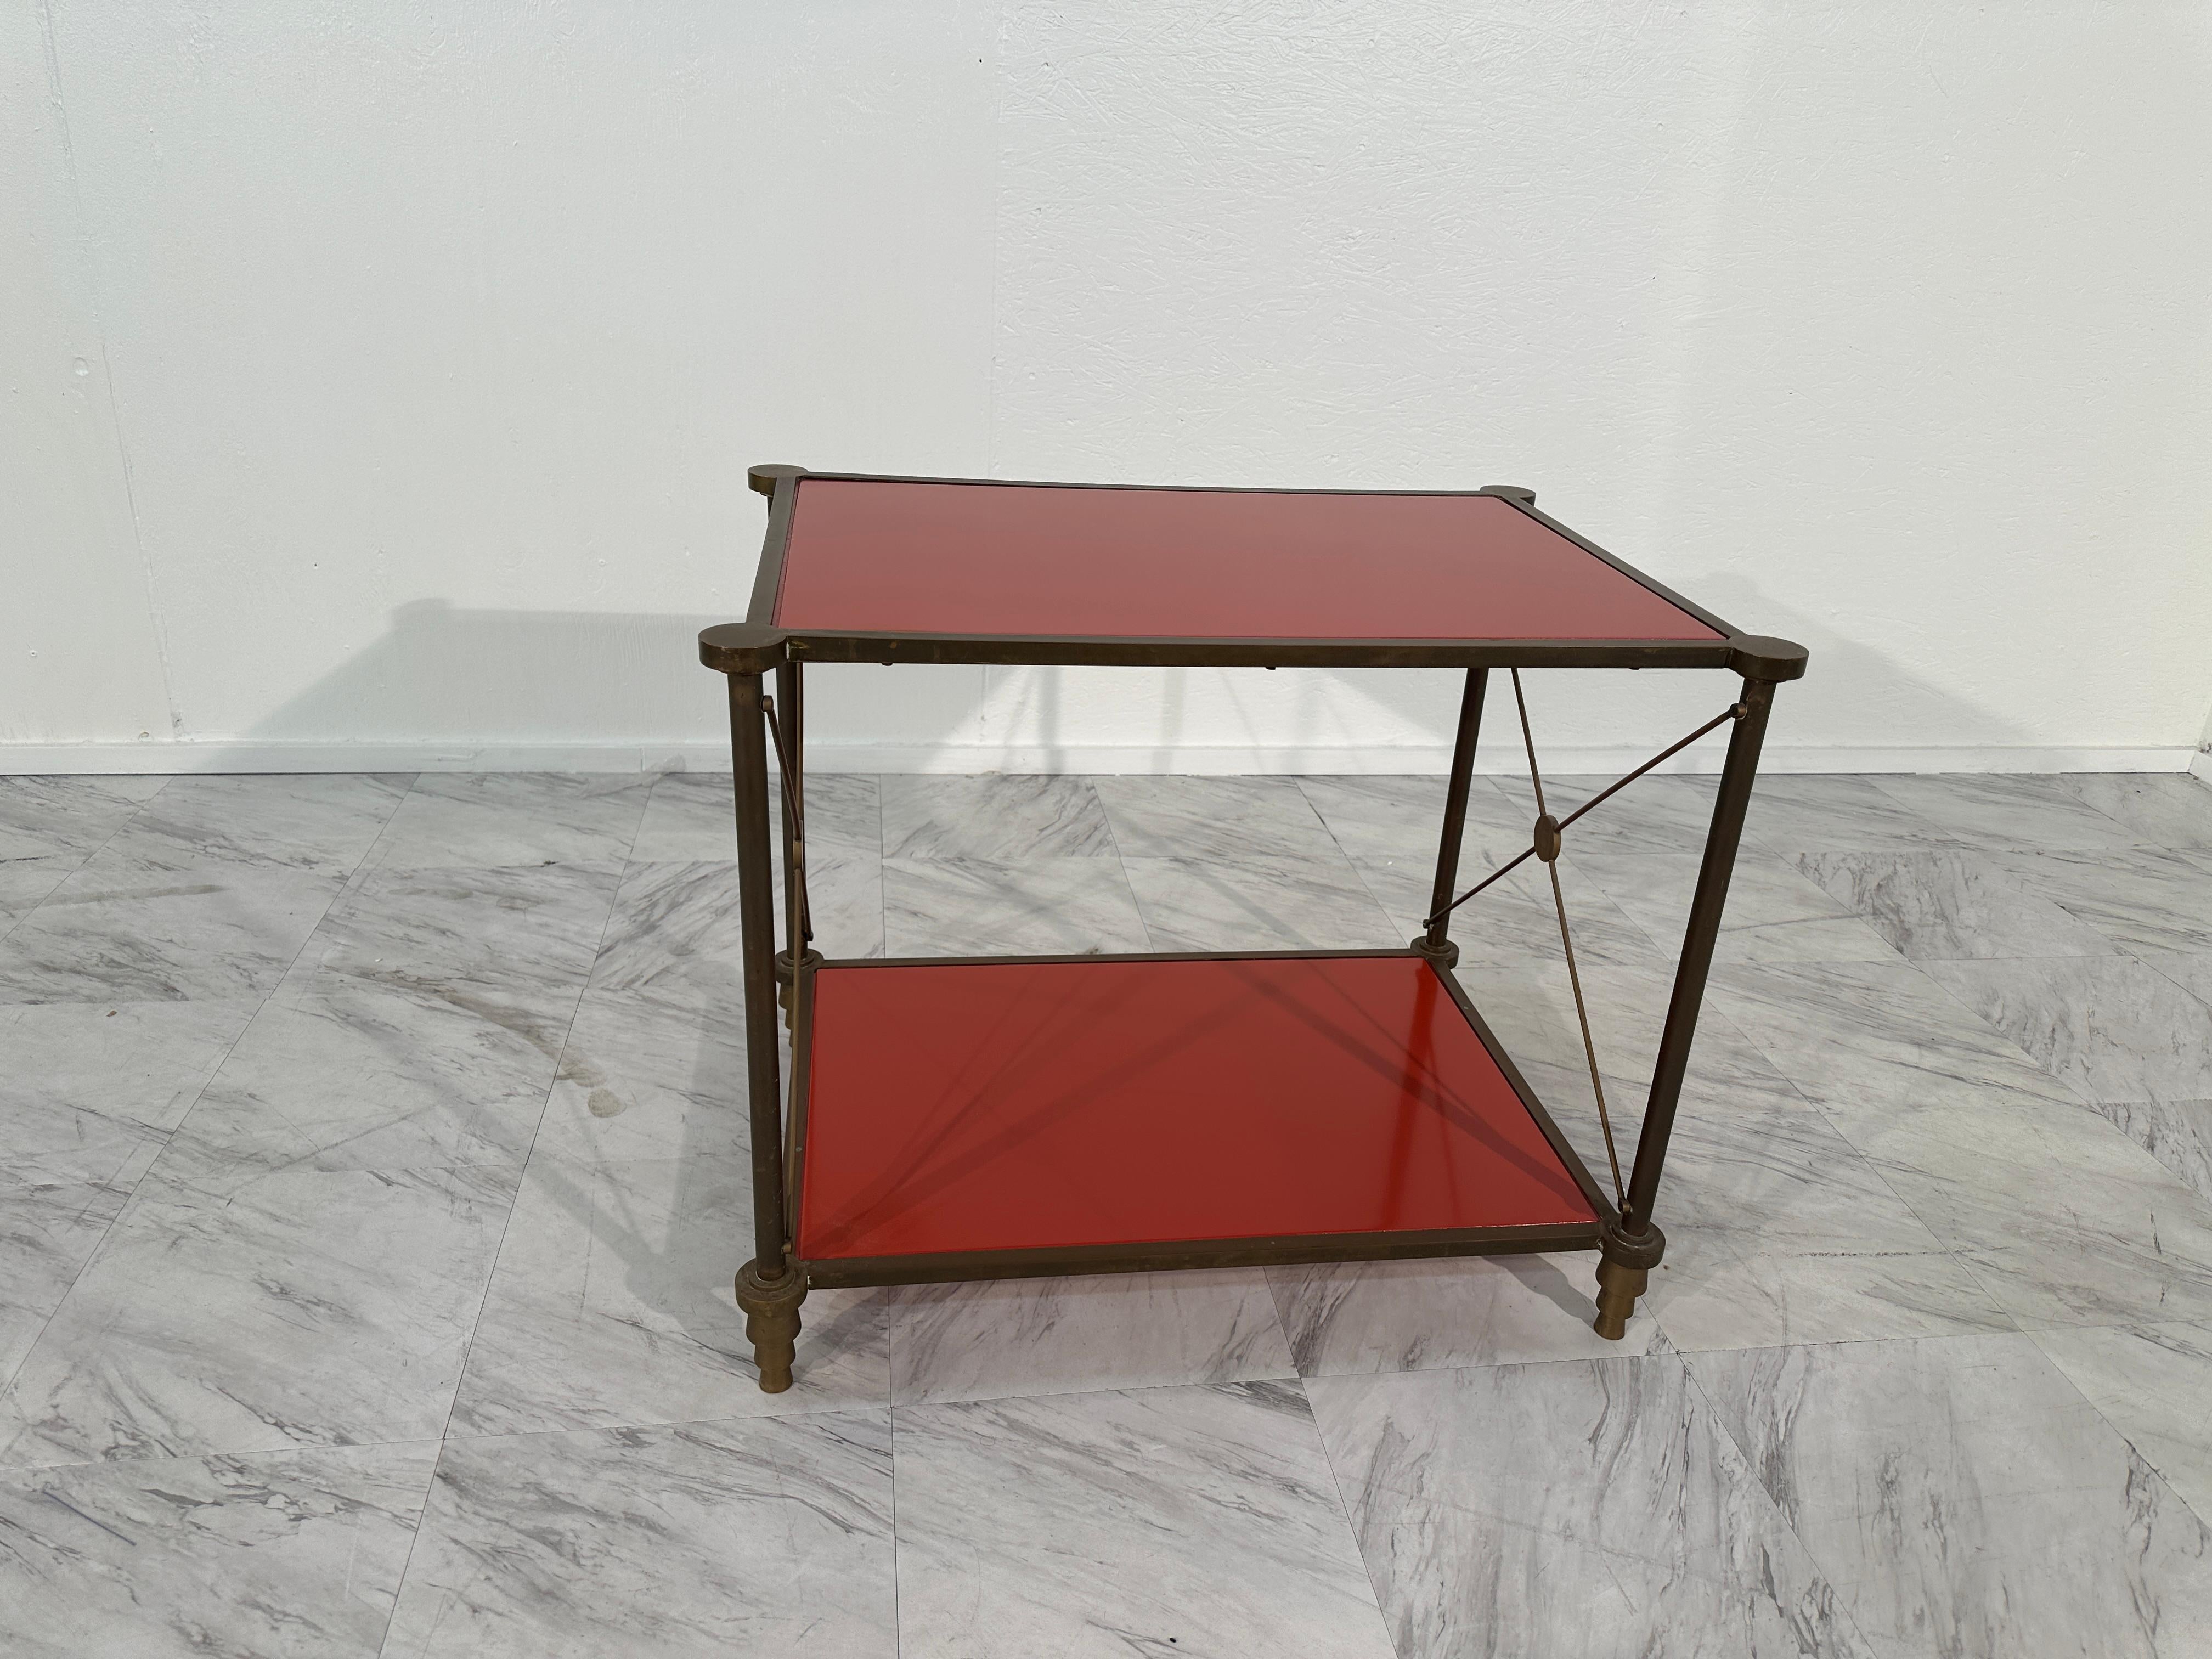 The Vintage Italian Brass Side Table from the 1980s boasts a sleek and sophisticated design, epitomizing the glamour of the era. Crafted with a fully brass frame, this table exudes luxurious charm and durability. Its two red tops add a pop of